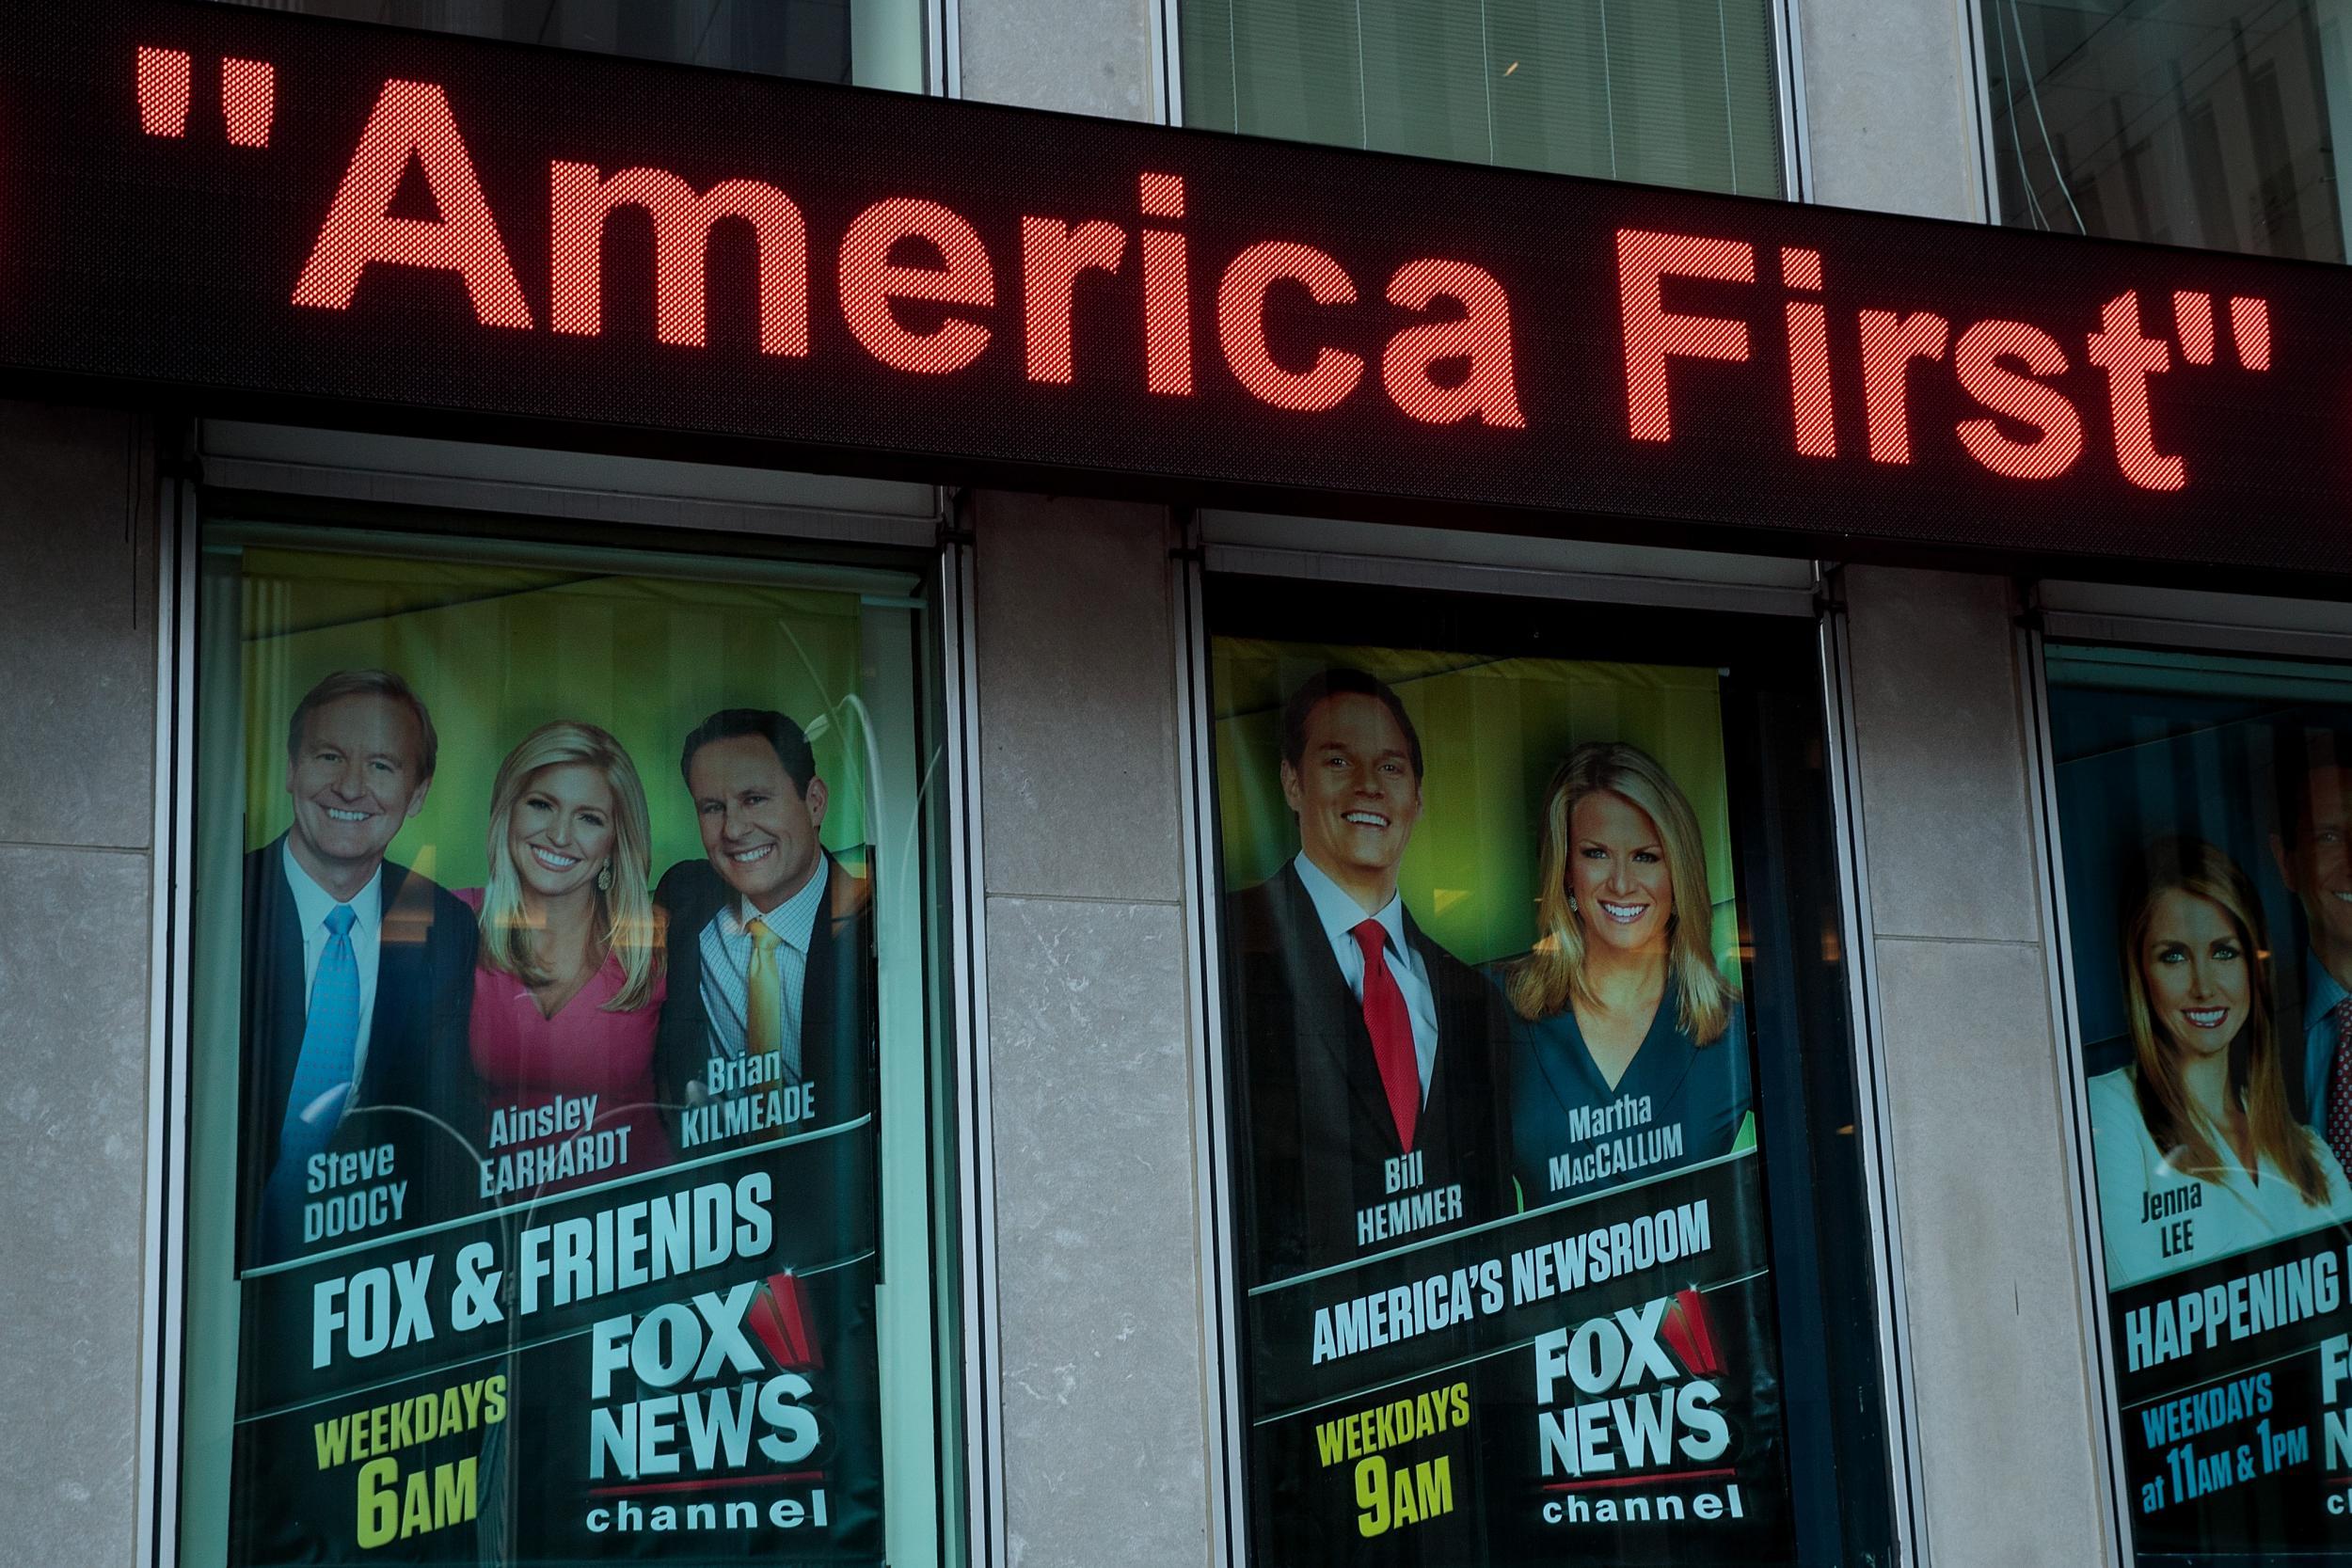 At left, an advertisement for 'Fox And Friends' programme is displayed outside of the Fox News studio in New York City.